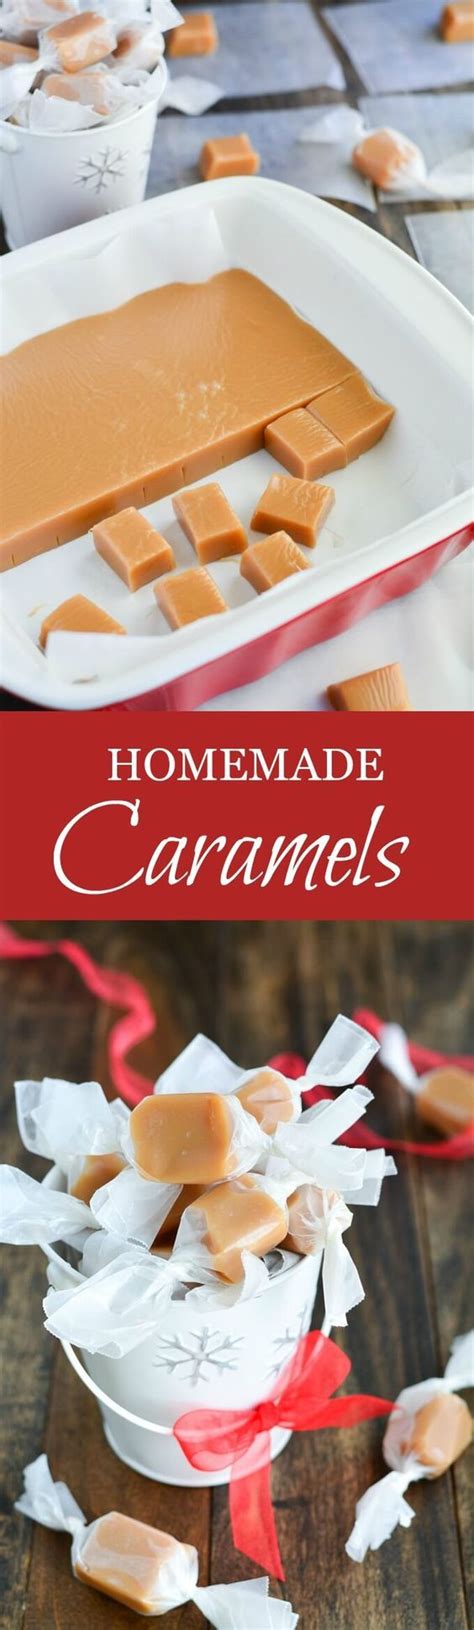 If for some reason you have leftover panettone after the christmas holidays that you need to use up, here's a fun recipe for you: Homemade Caramels | Recipe | Homemade caramel, Candy recipes, Desserts